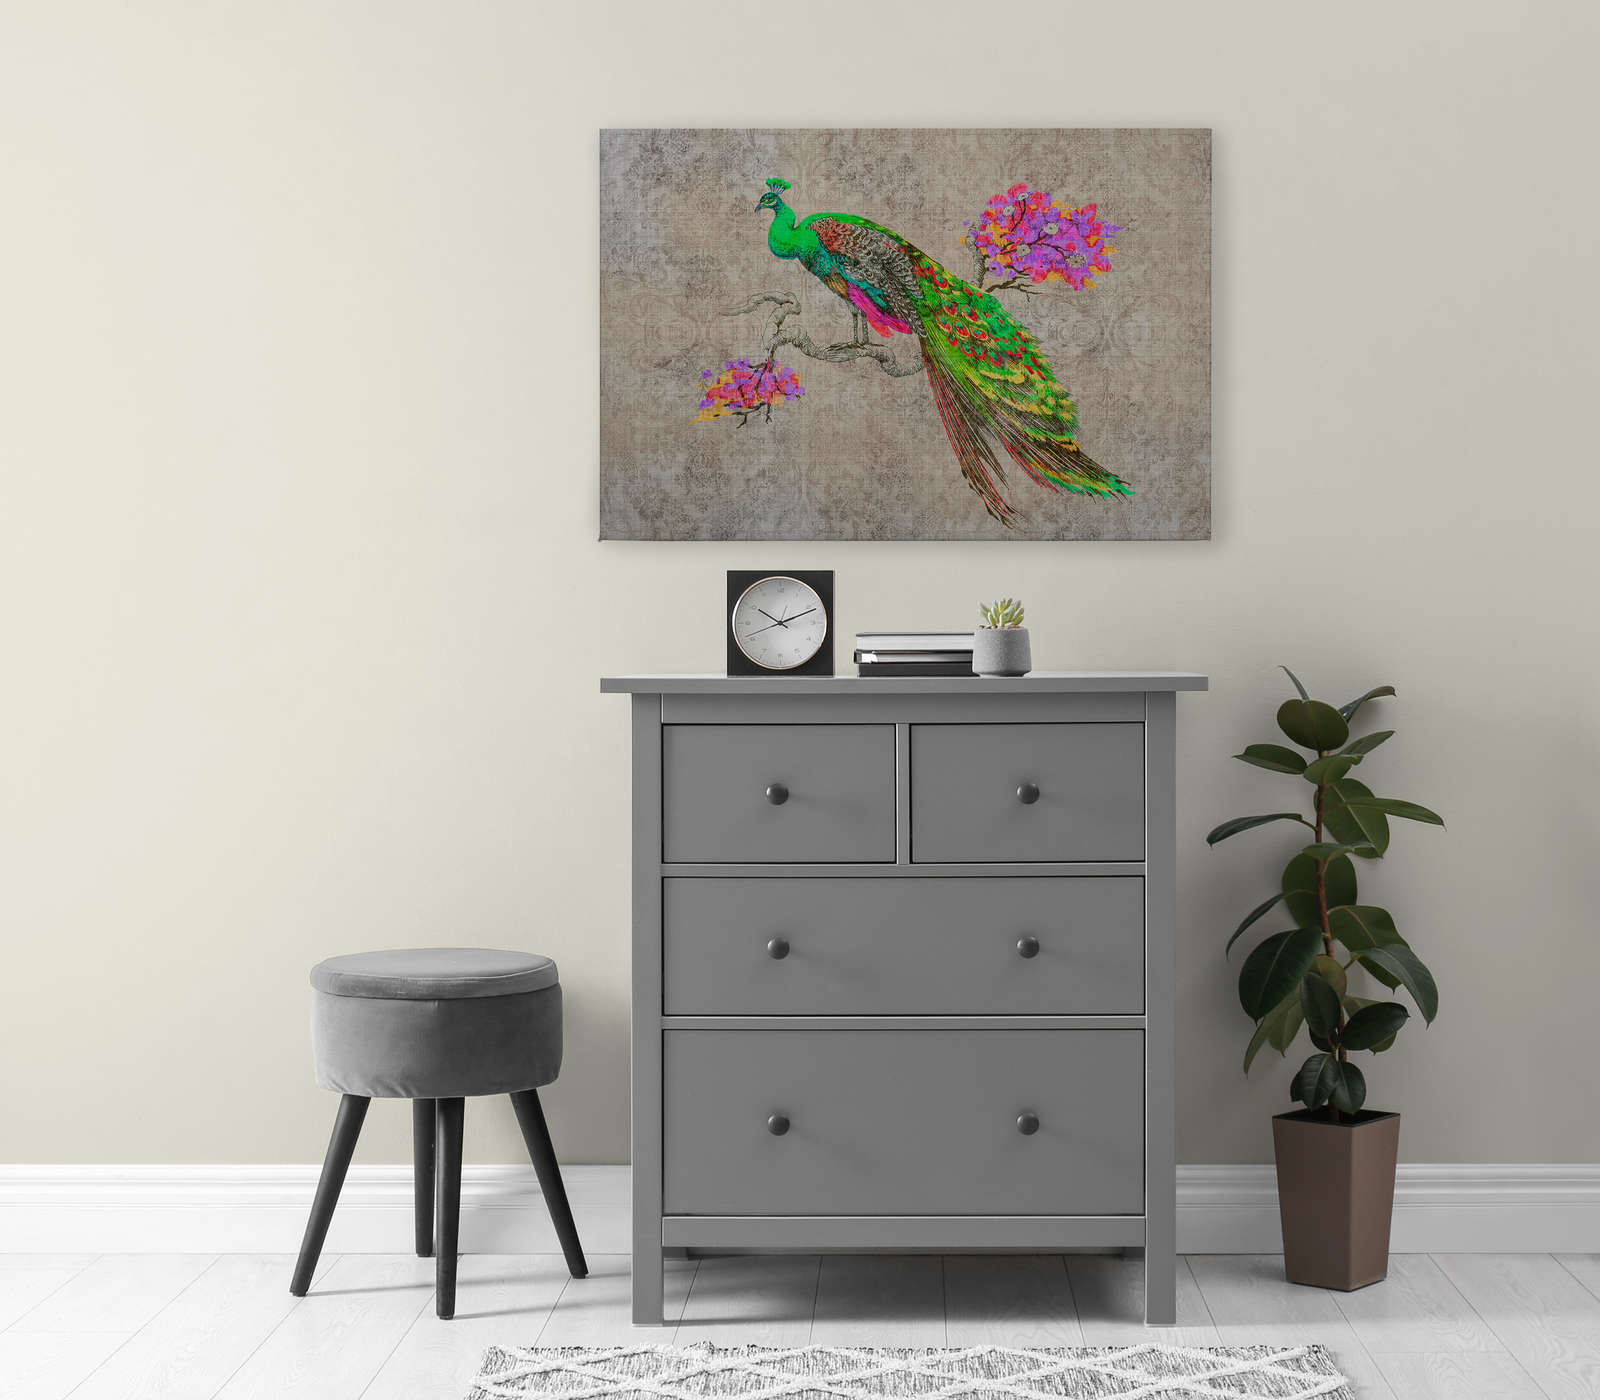             Peacock 1 - Canvas painting in natural linen structure with peacock in neon colours - 0.90 m x 0.60 m
        